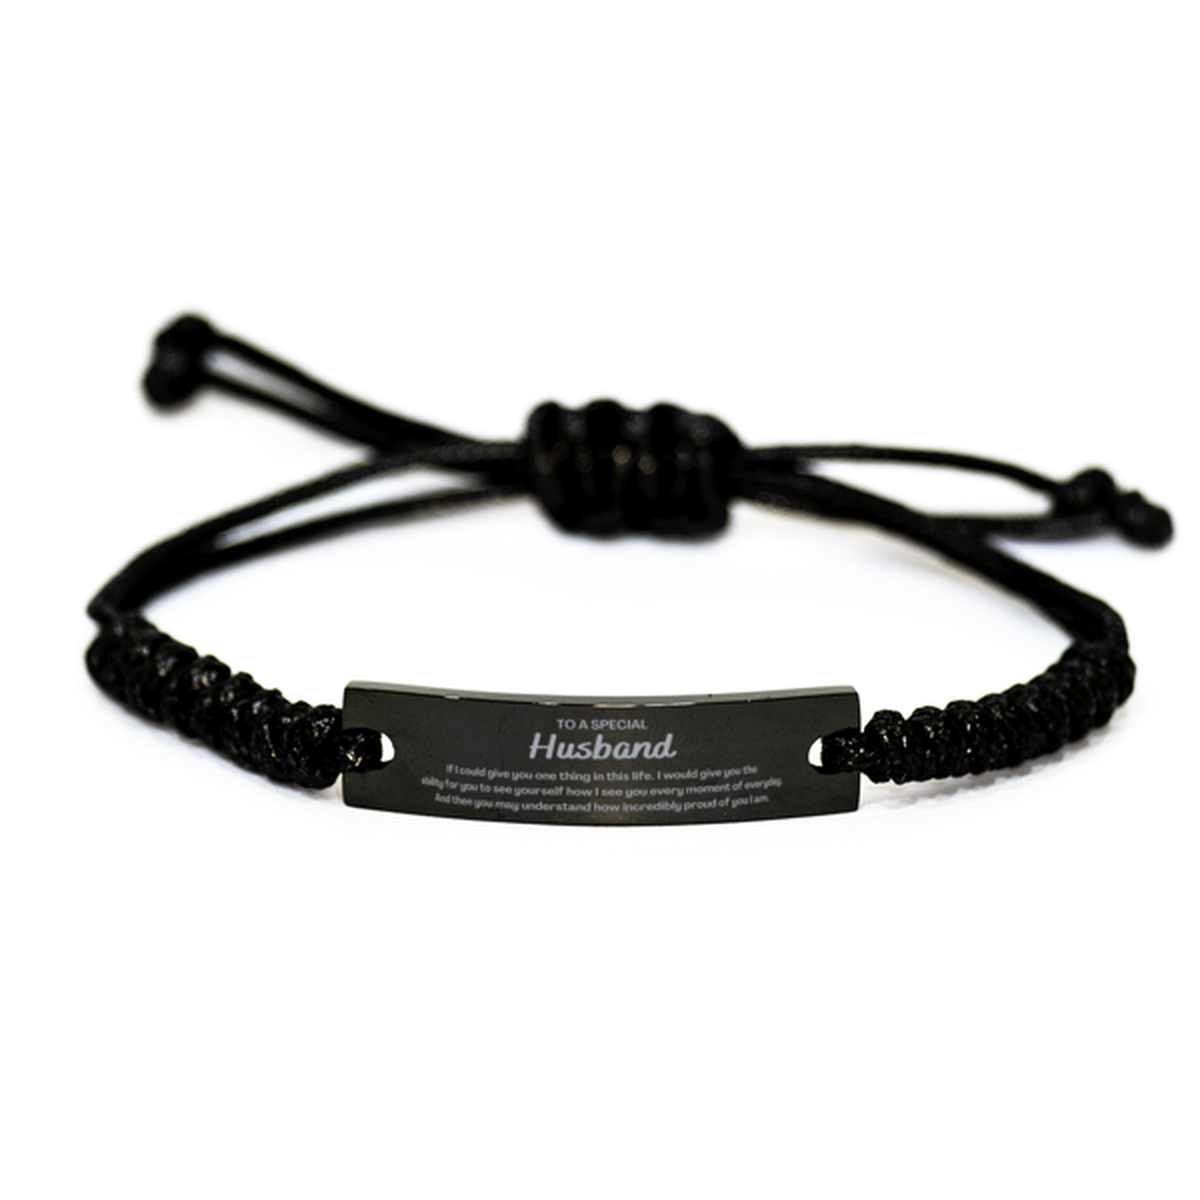 To My Husband Black Rope Bracelet, Gifts For Husband Engraved, Inspirational Gifts for Christmas Birthday, Epic Gifts for Husband To A Special Husband how incredibly proud of you I am